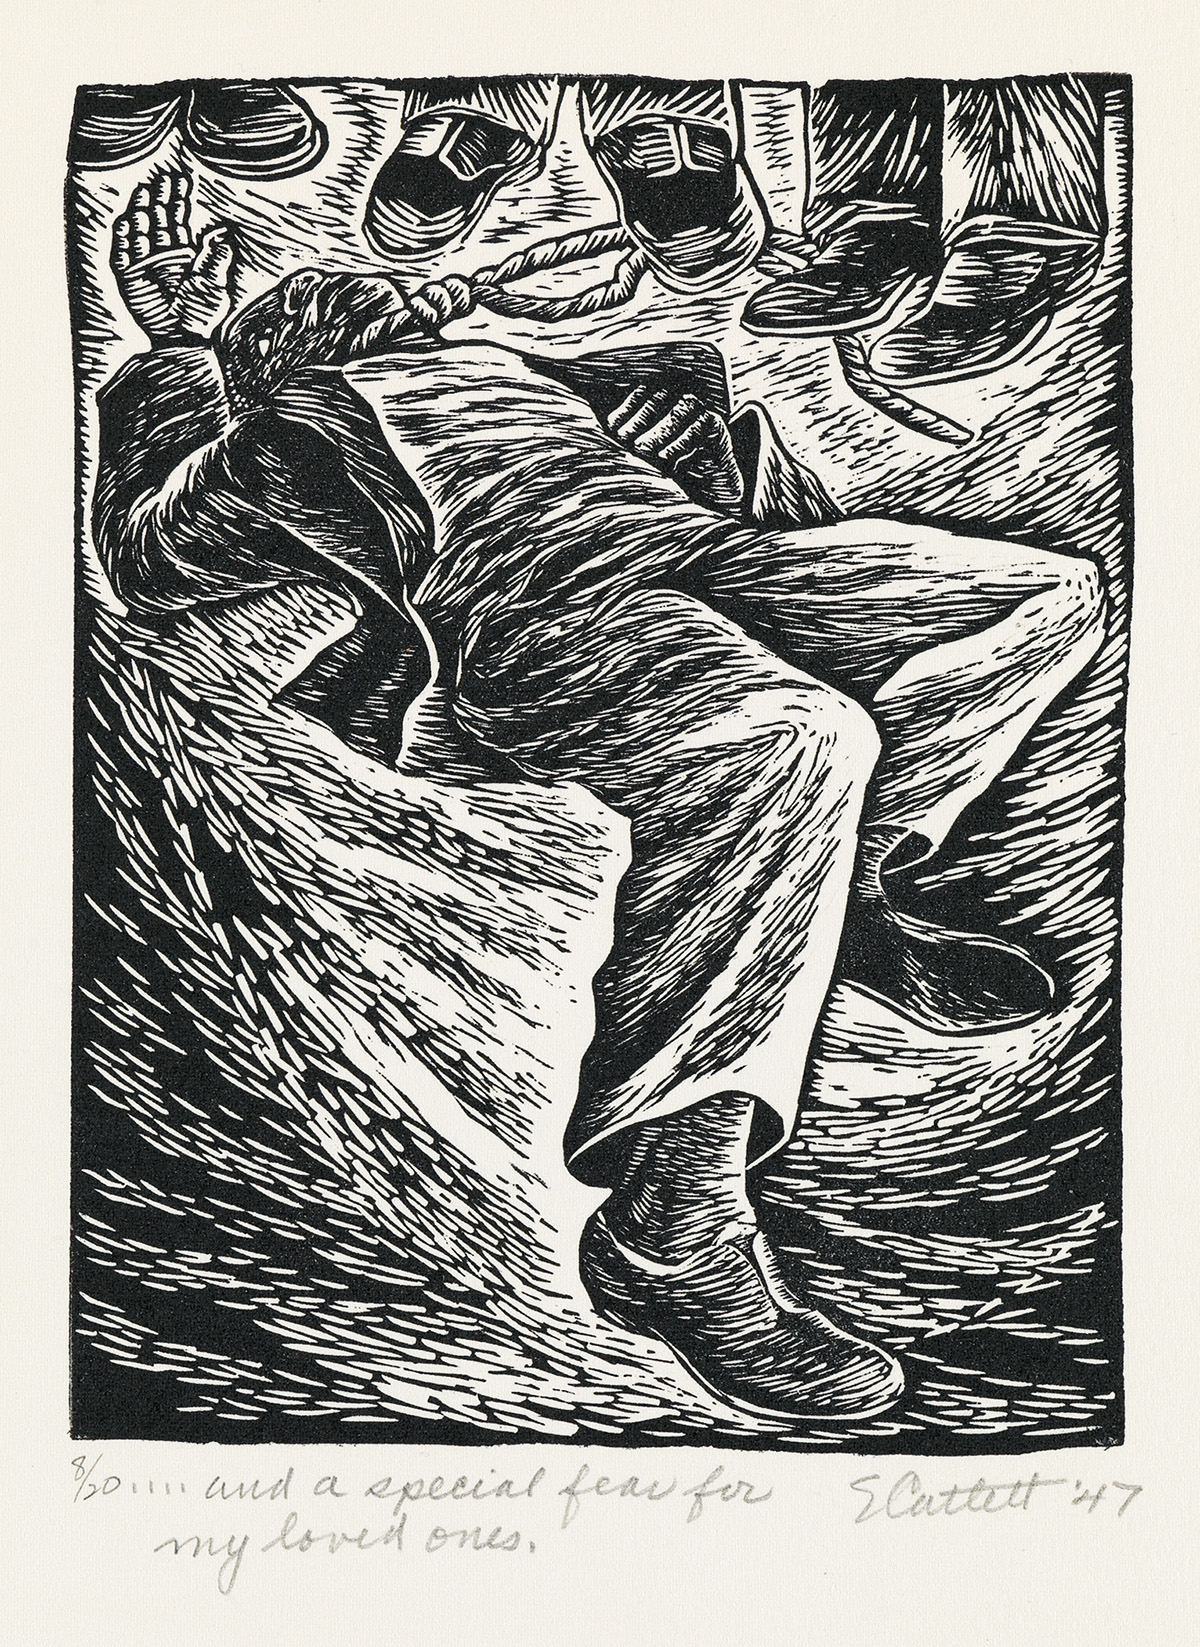 ELIZABETH CATLETT (1915 - 2012) ...and a special fear for my loved ones.